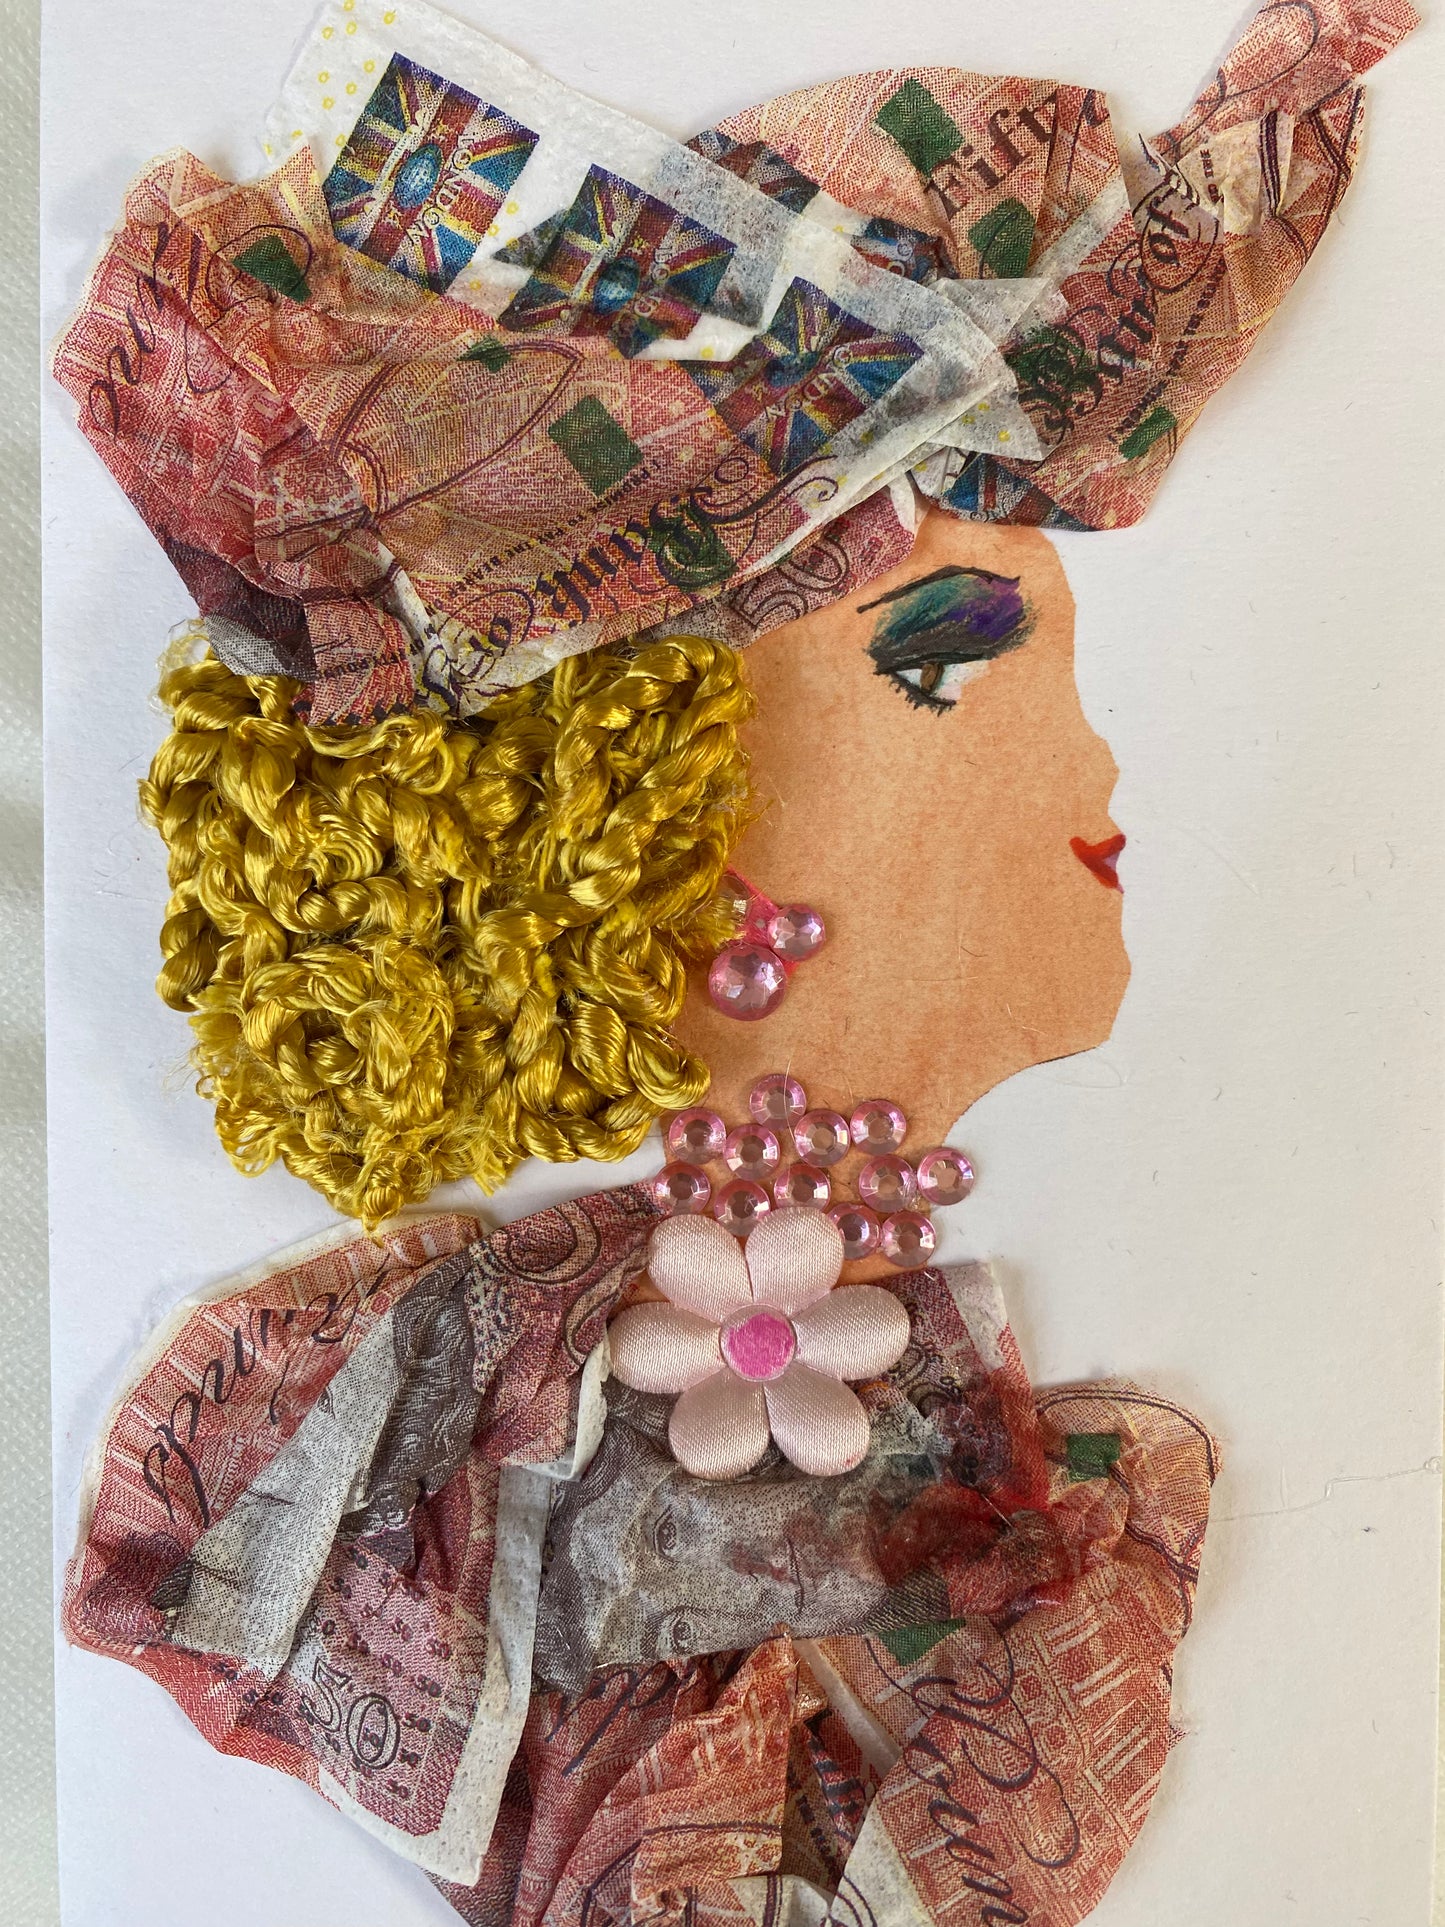 I designed this card of a woman called Donut Peach Moni. She has a white skin tone with curly yellow hair. She wears a money print hat with a matching money print blouse. On her blouse there is a pink flower in the middle. She wears pink gem jewellery.